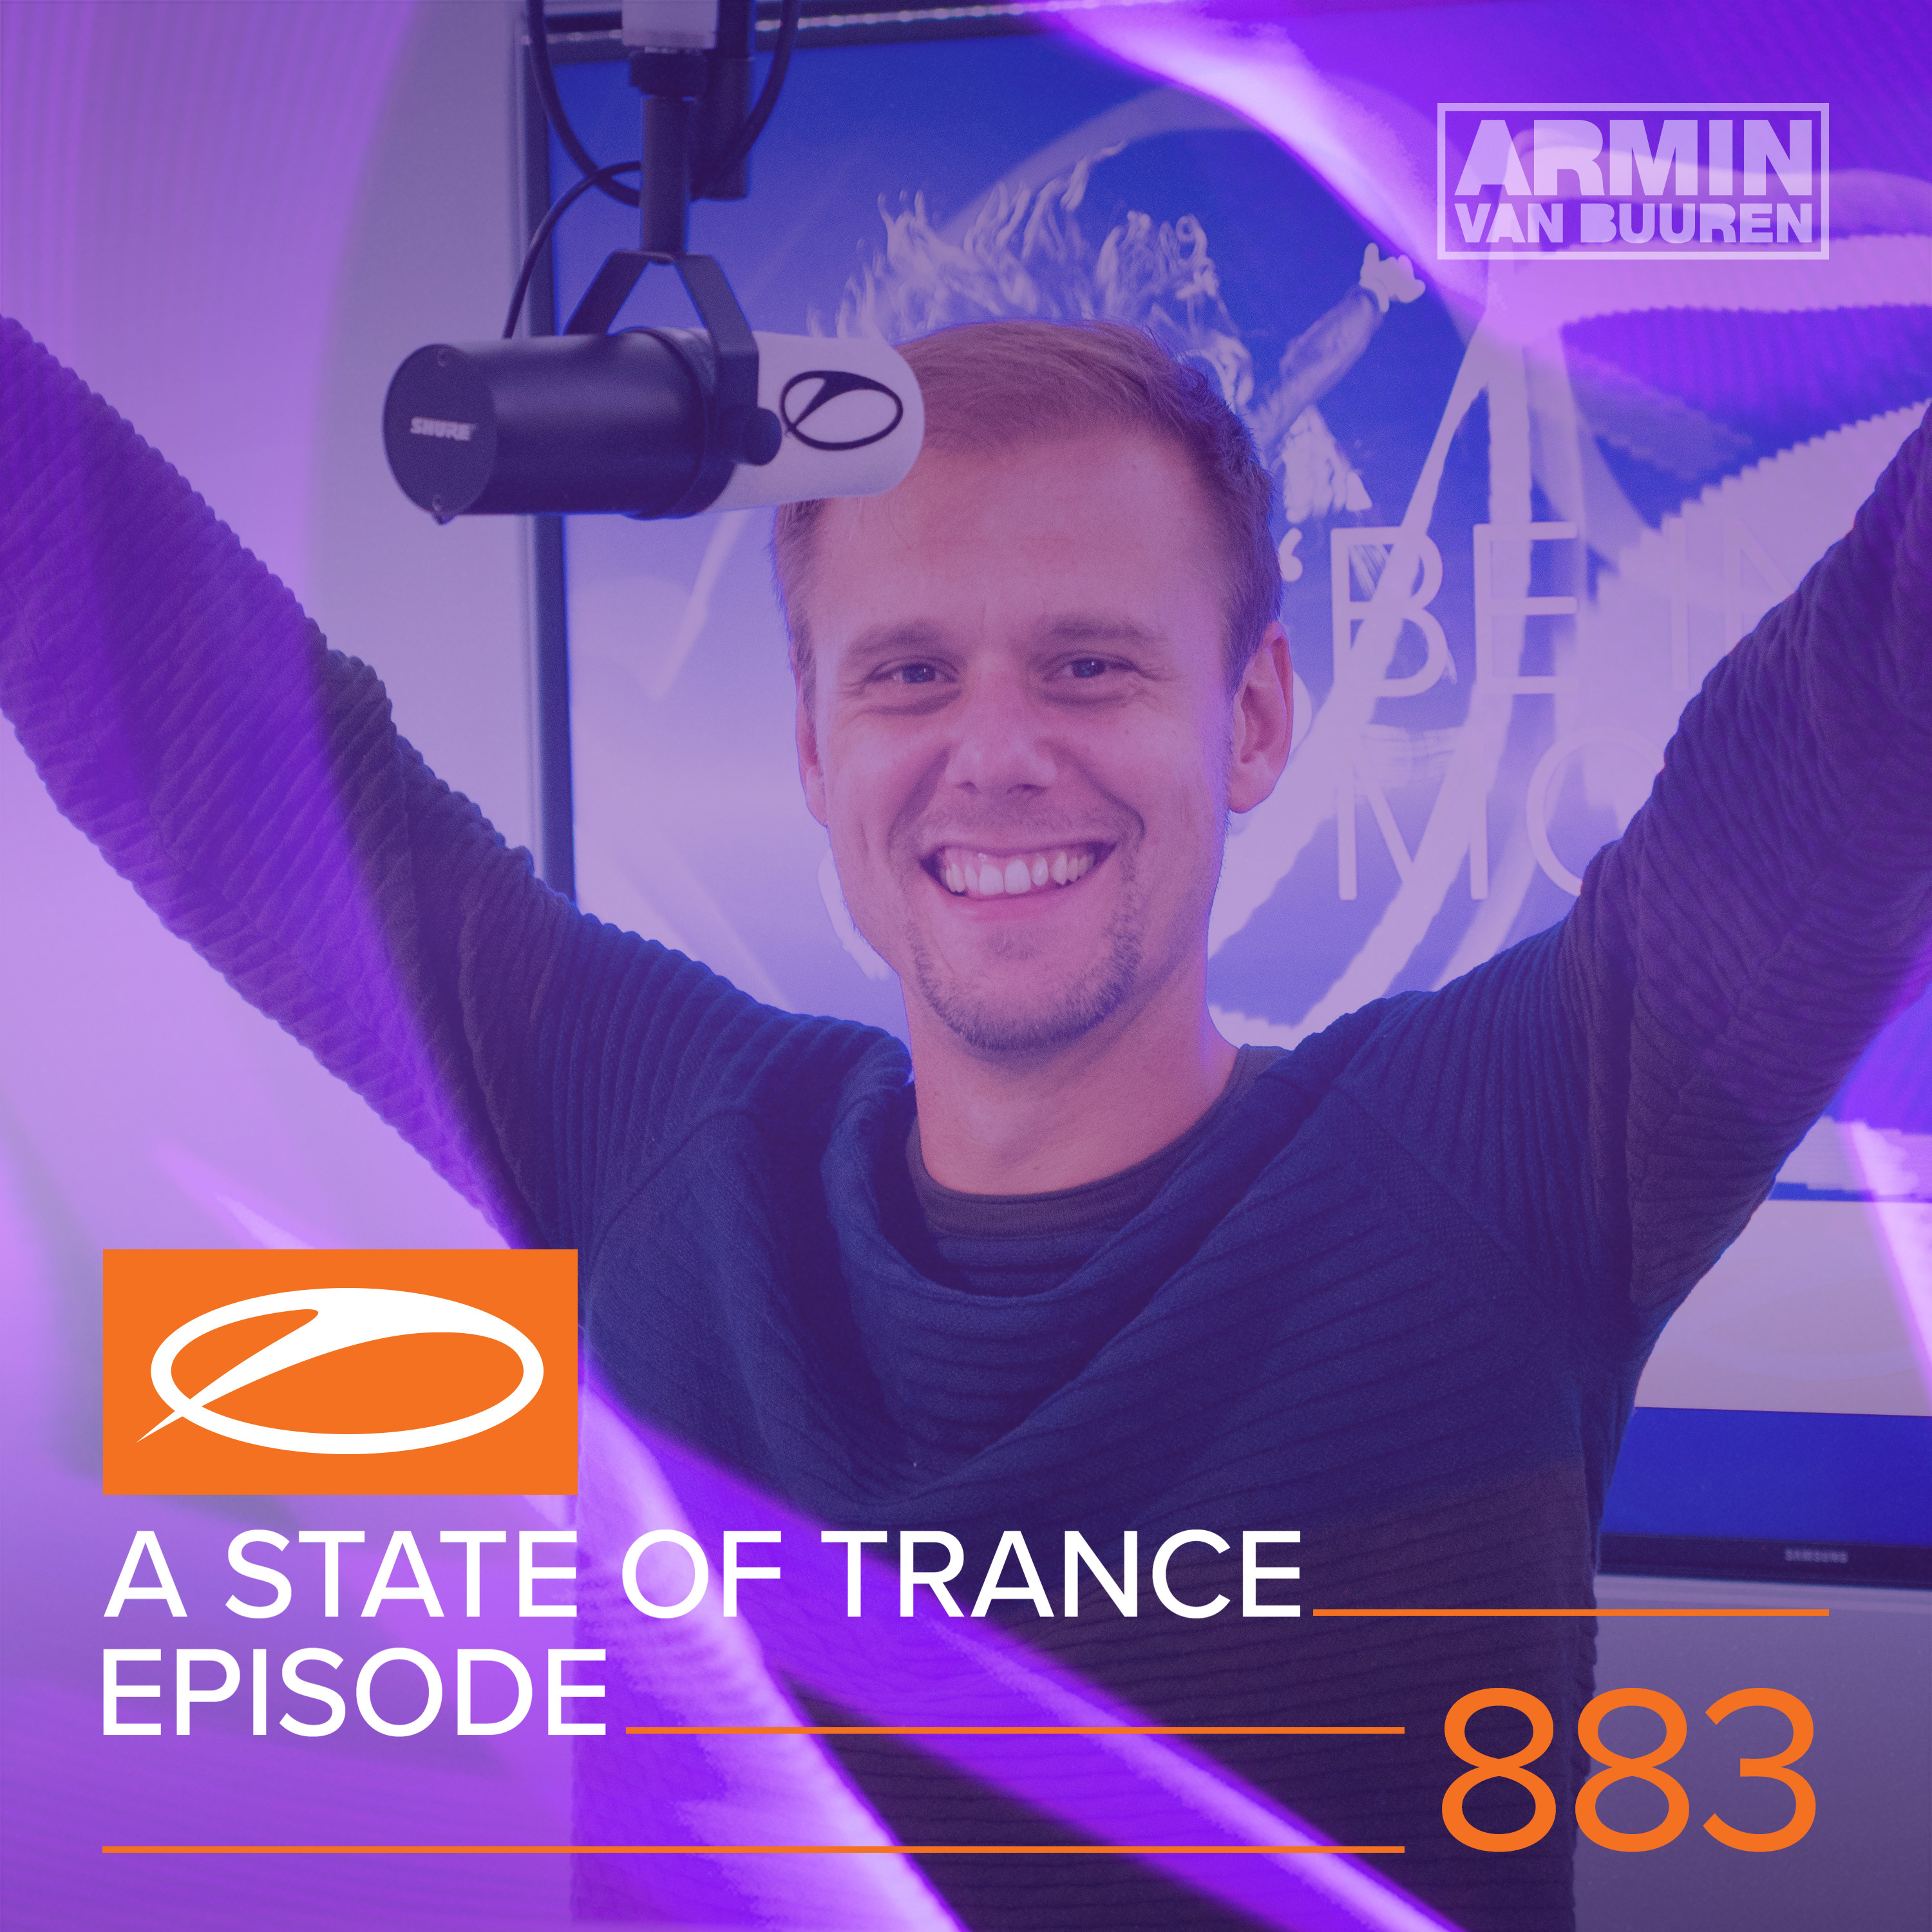 Start With A Dream (ASOT 883)